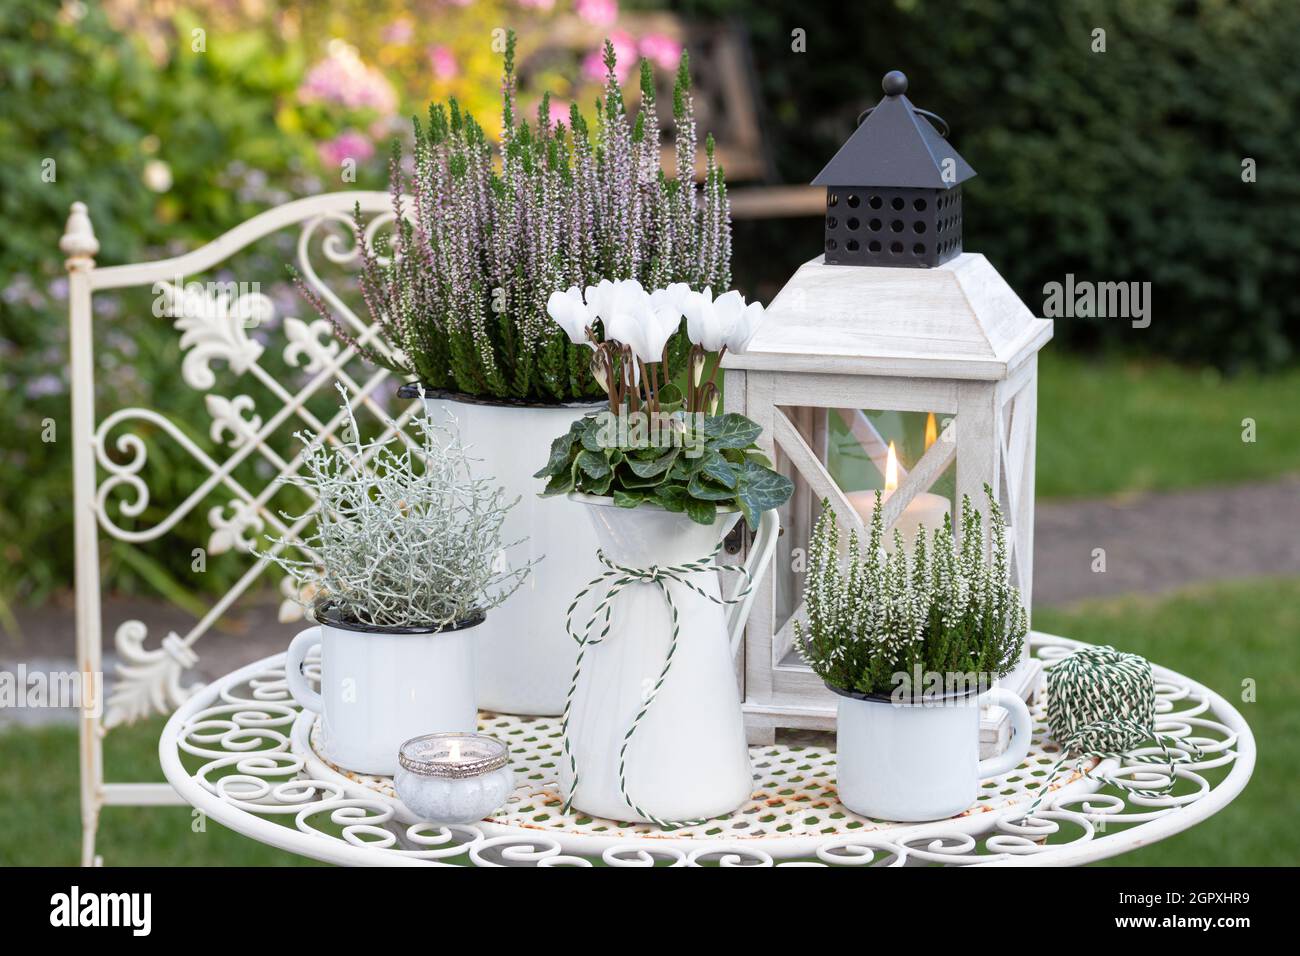 autumn garden decoration with white cyclamen and heather flowers in vintage pots Stock Photo